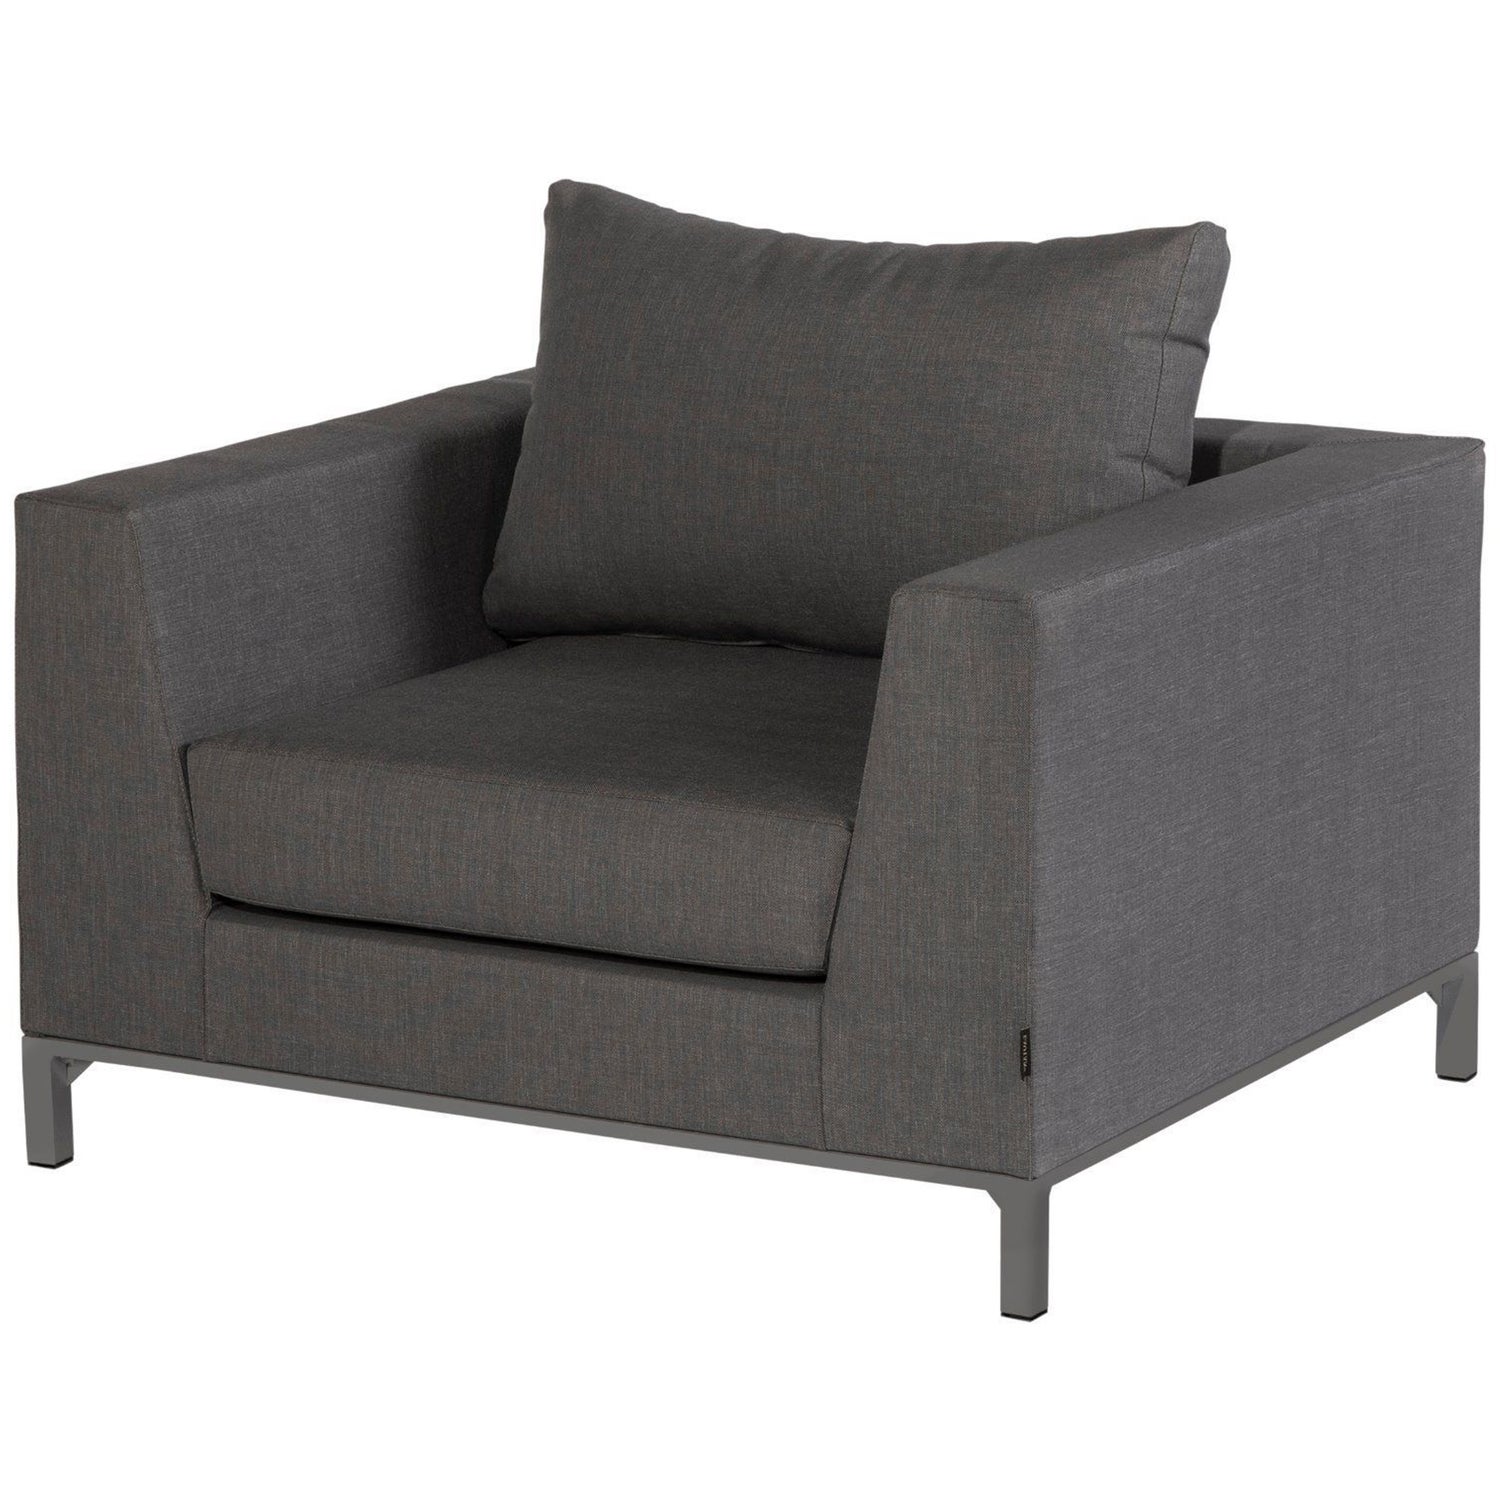 CH5884CSGA-01_VS_EXT_Sicilie_fauteuil_stone_grey_SA.jpg?auto=webp&format=png&width=1500&height=1500